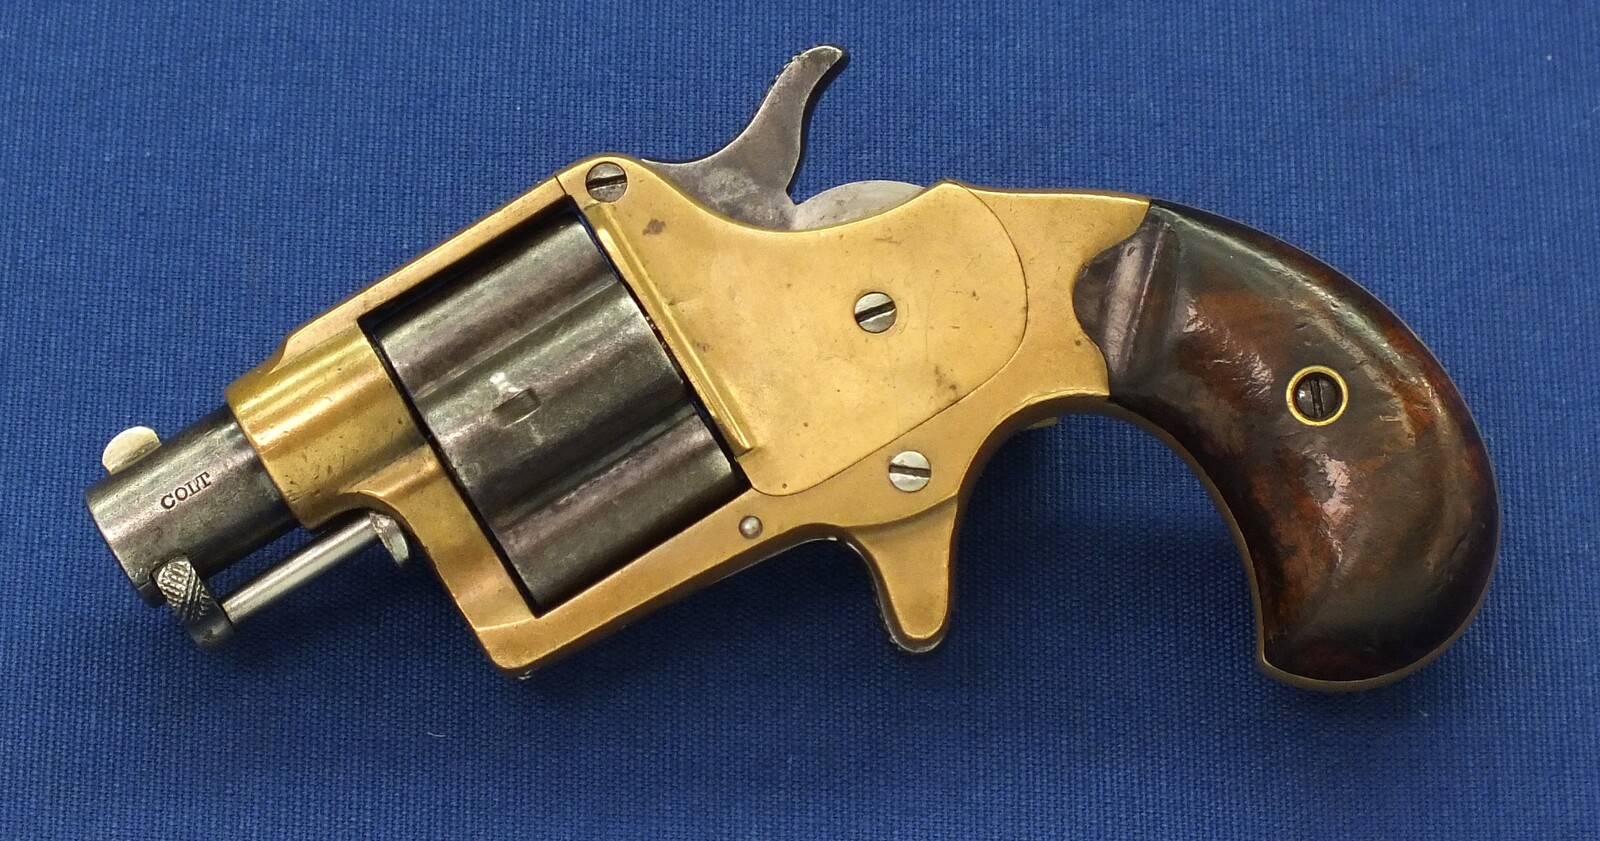 A scarce antique American Colt House Cloverleaf Model Revolver with 1-1/2 inch round barrel. 4 shot .41 Rimfire Caliber. Provenance: Robert Q Sutherland Collection. Length 15 cm. In very good condition. Price 2.950 euro.